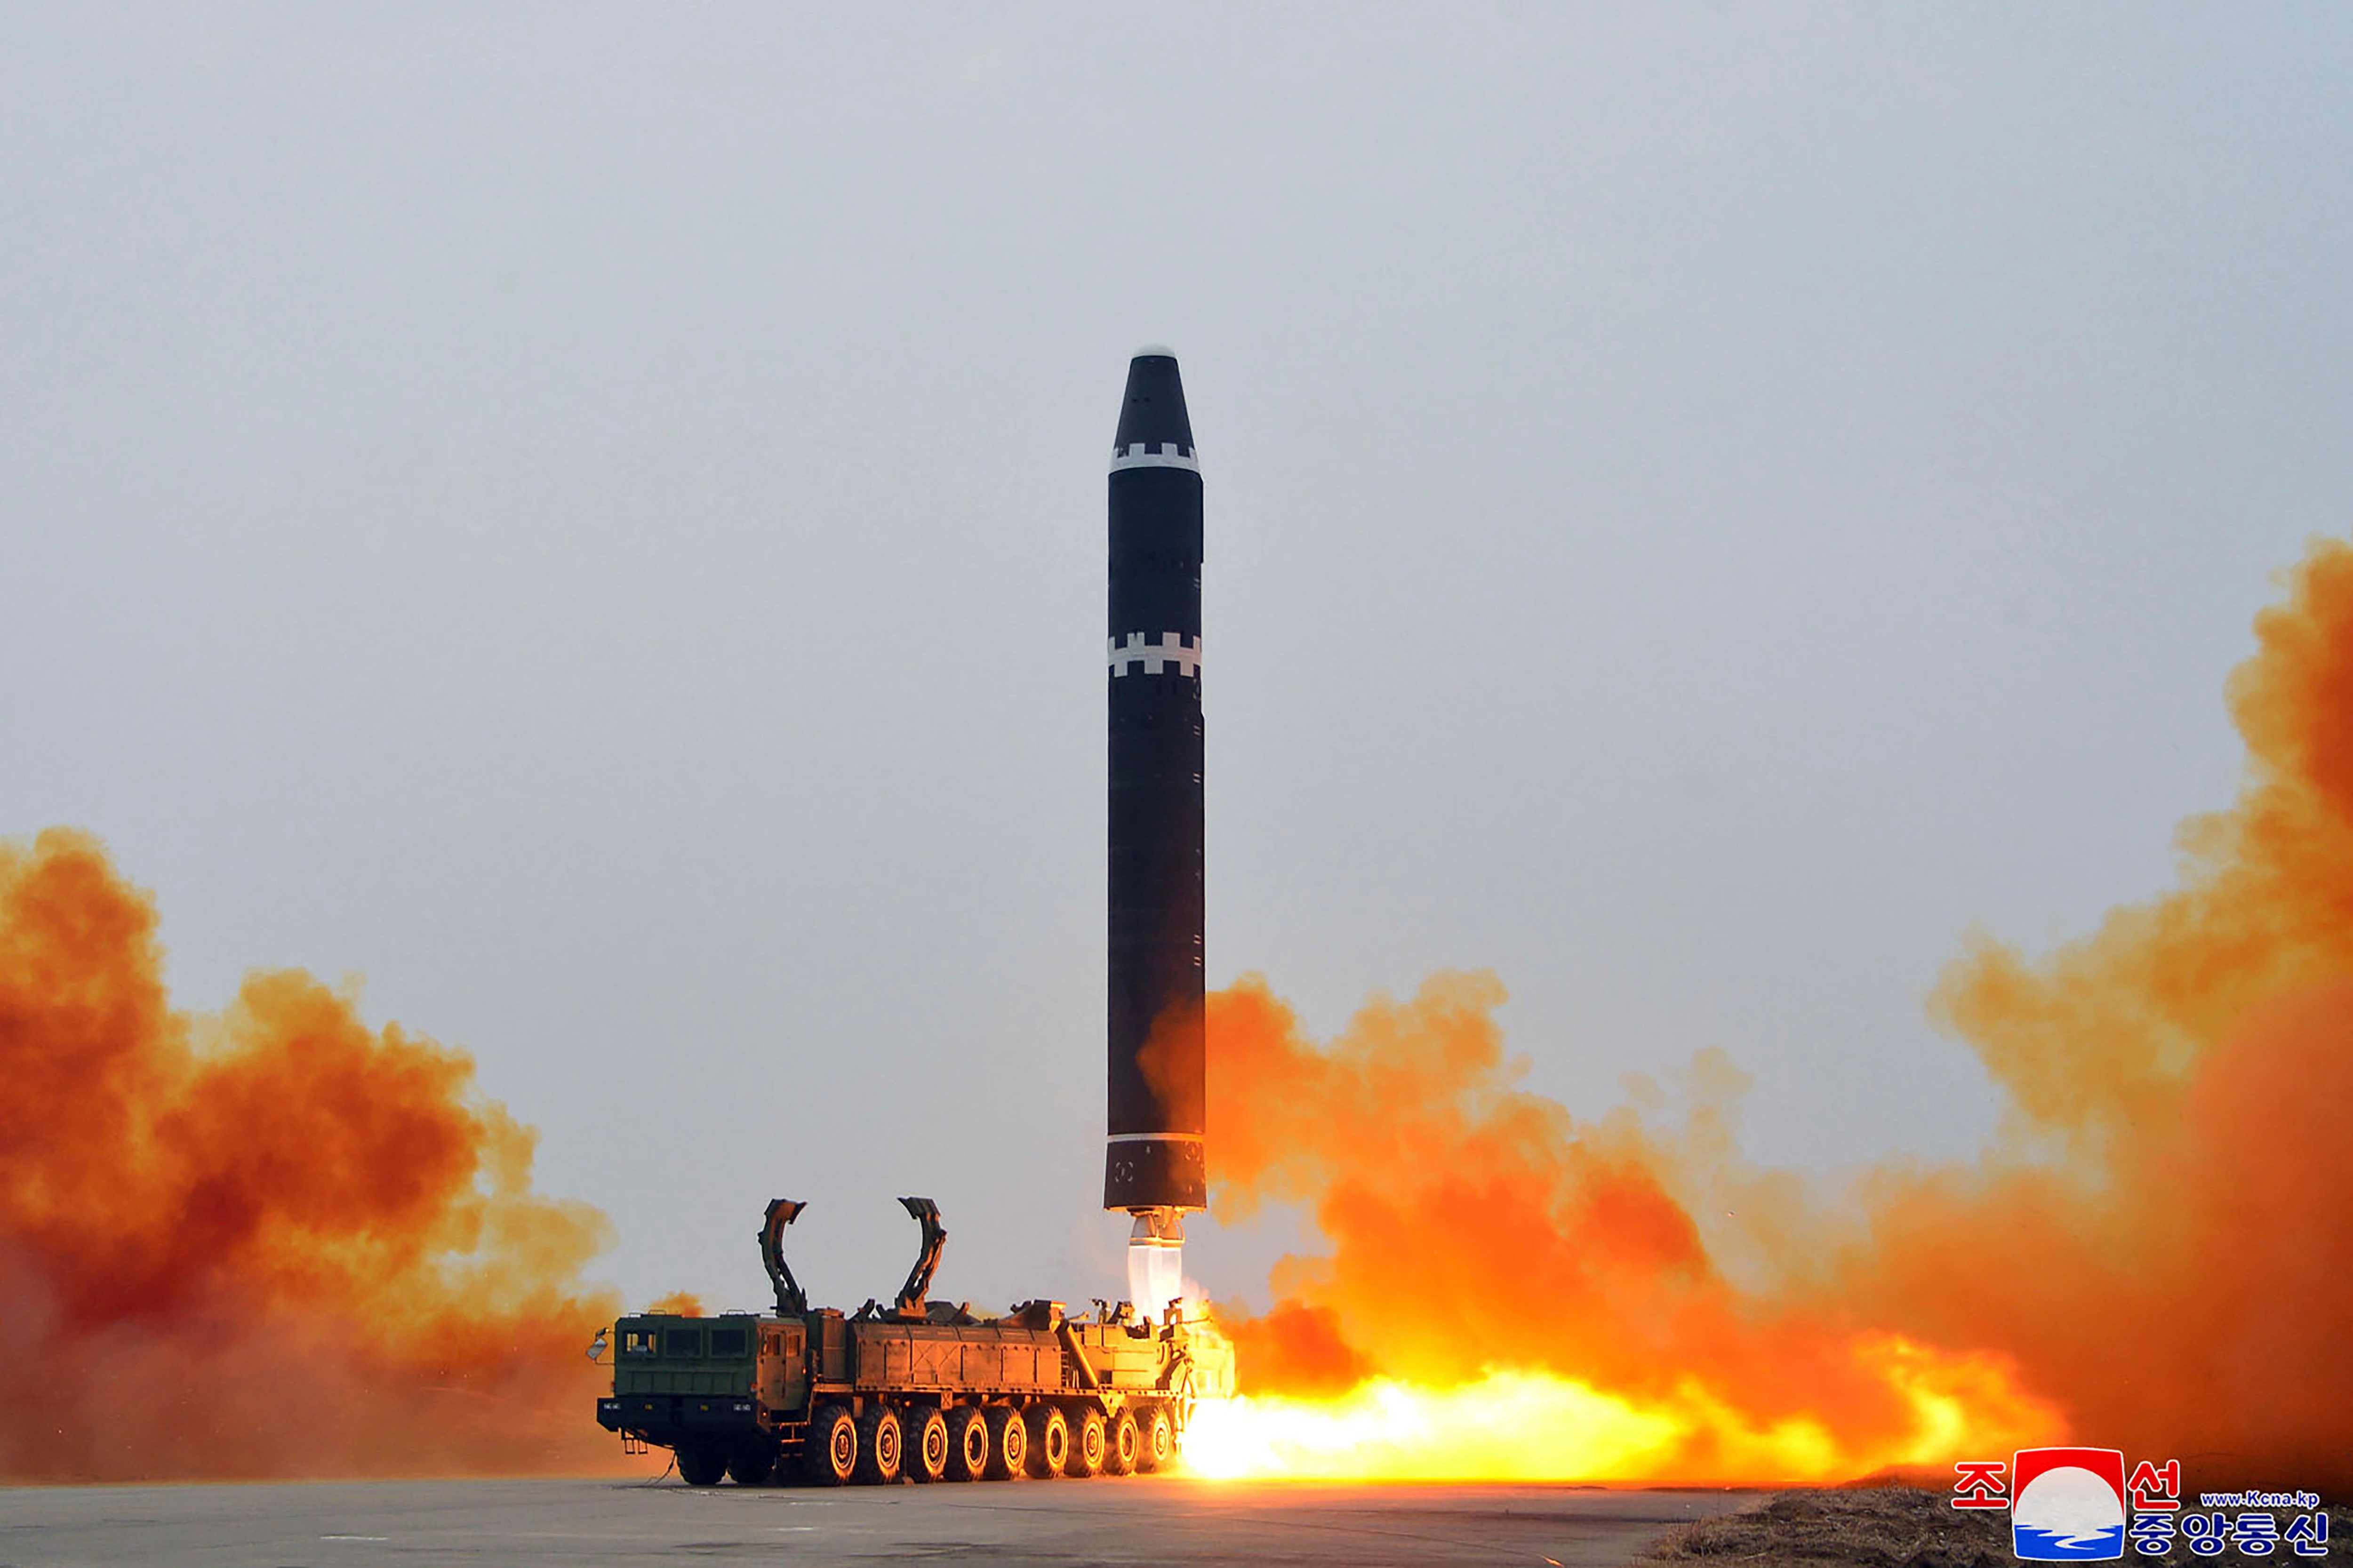 North Korea confirms ICBM check, warns of extra highly effective steps in response to South Korea, US trainings